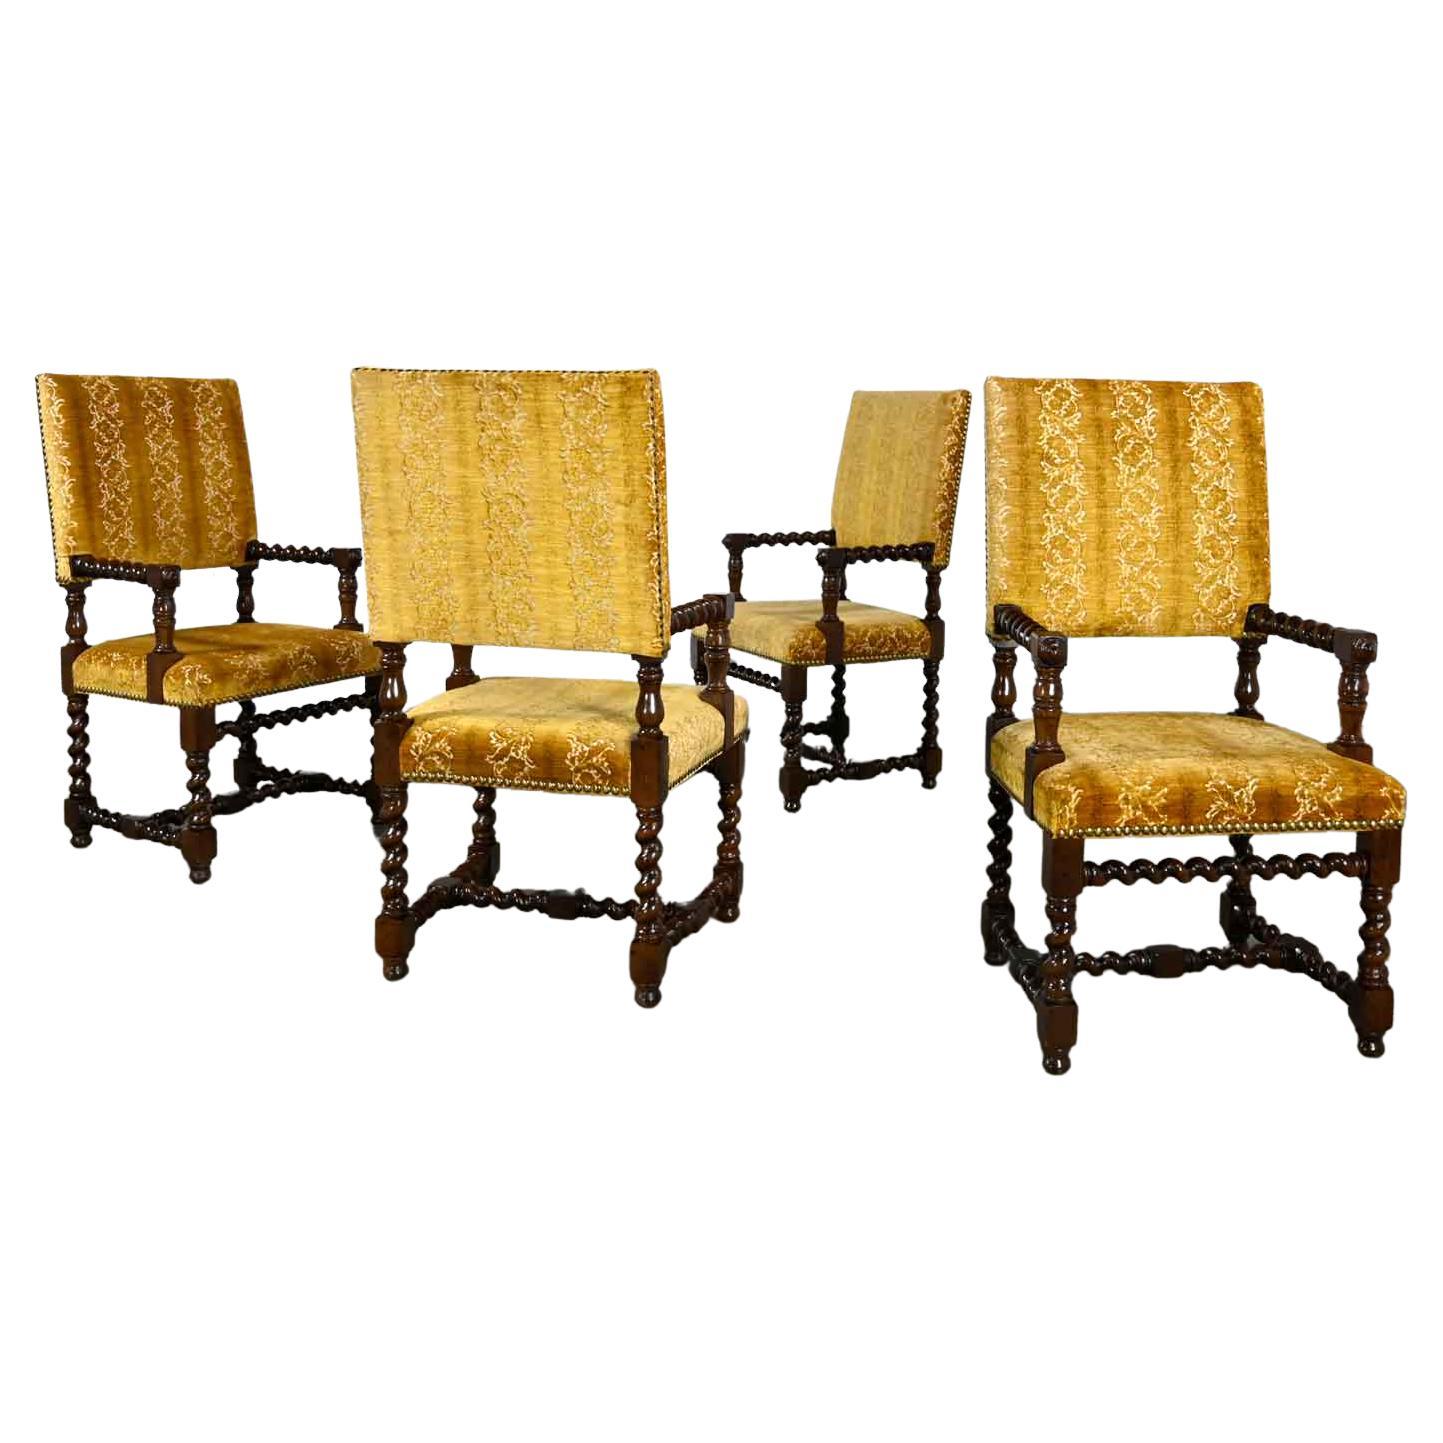 https://a.1stdibscdn.com/4-large-henredon-jacobean-style-armed-dining-chairs-barley-twist-gold-chenille-for-sale/f_18733/f_269164621642203592080/f_26916462_1642203592491_bg_processed.jpg